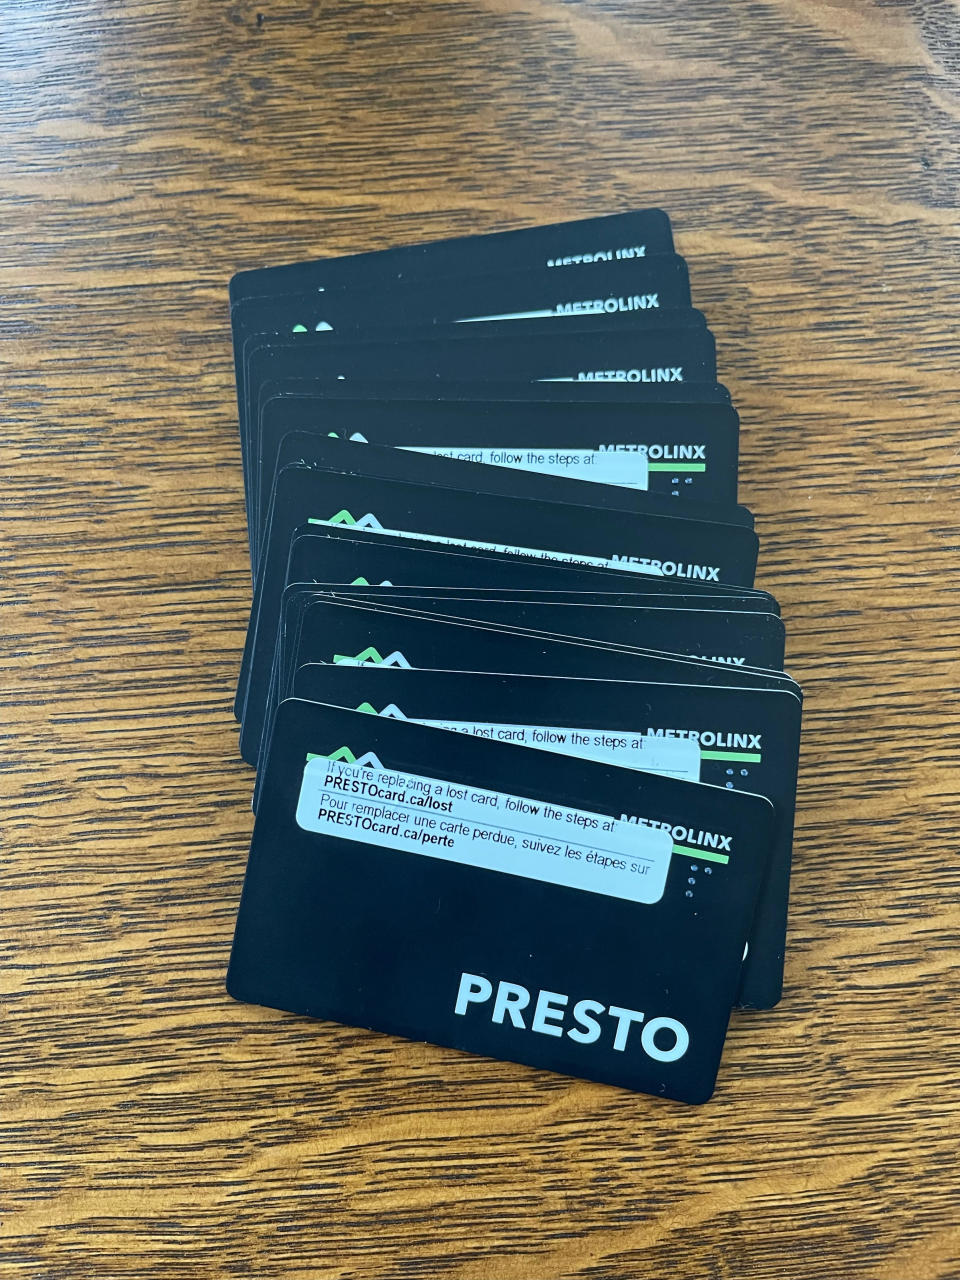 The couple handed out loaded Presto cards to passengers. 